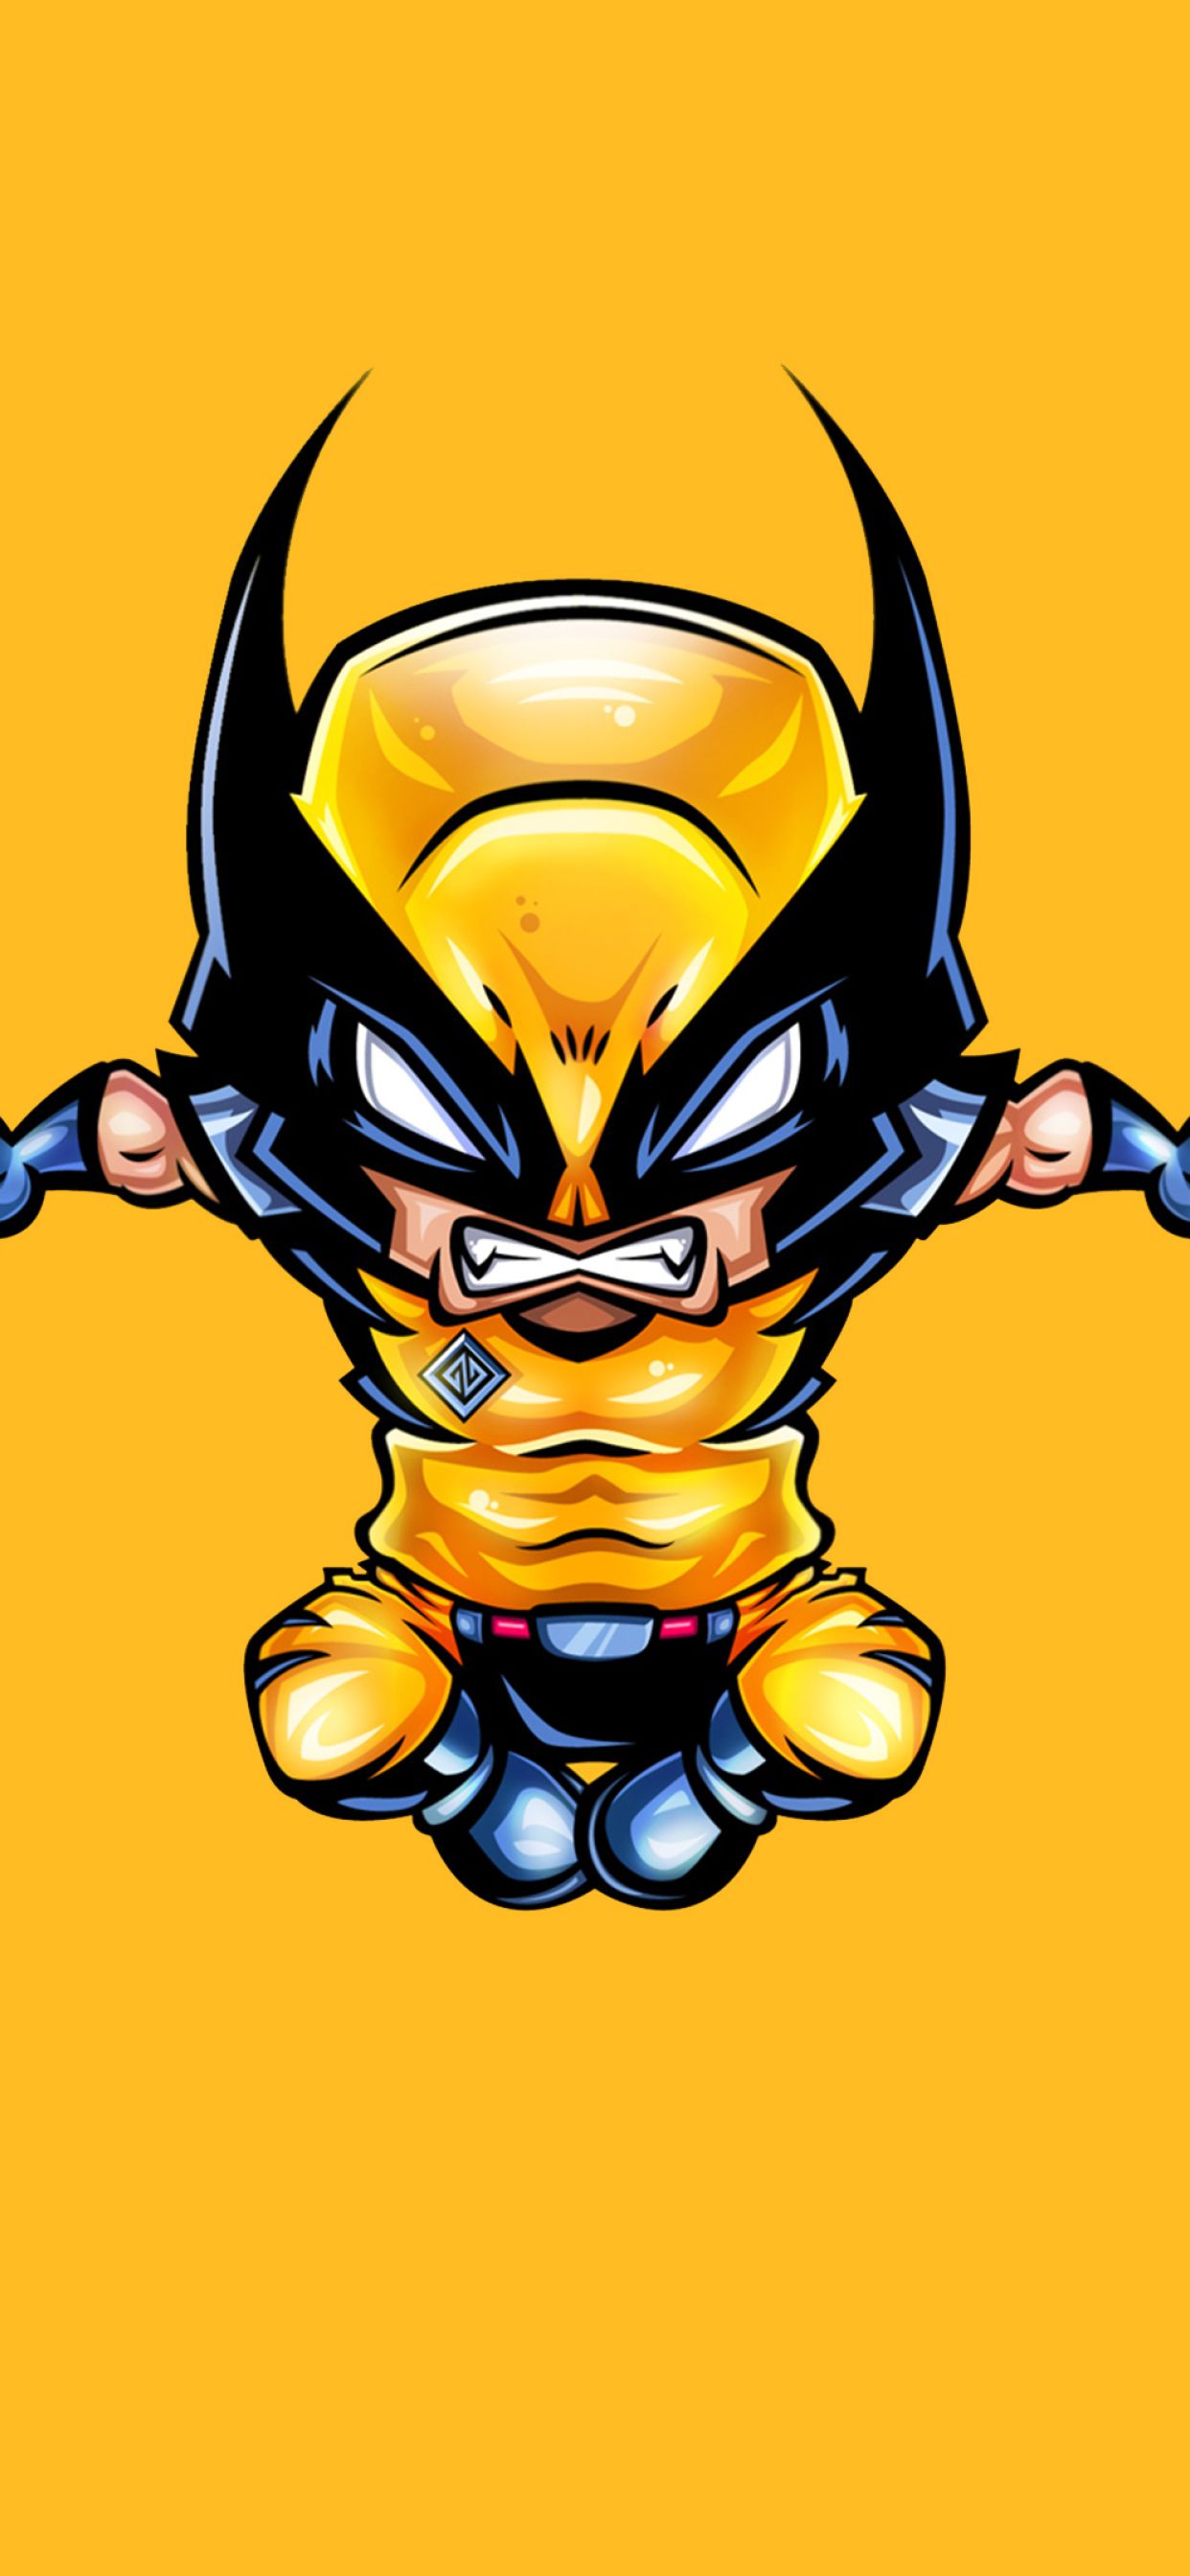 Wolverine Minimal iPhone XS MAX Wallpaper, HD Superheroes 4K Wallpaper, Image, Photo and Background